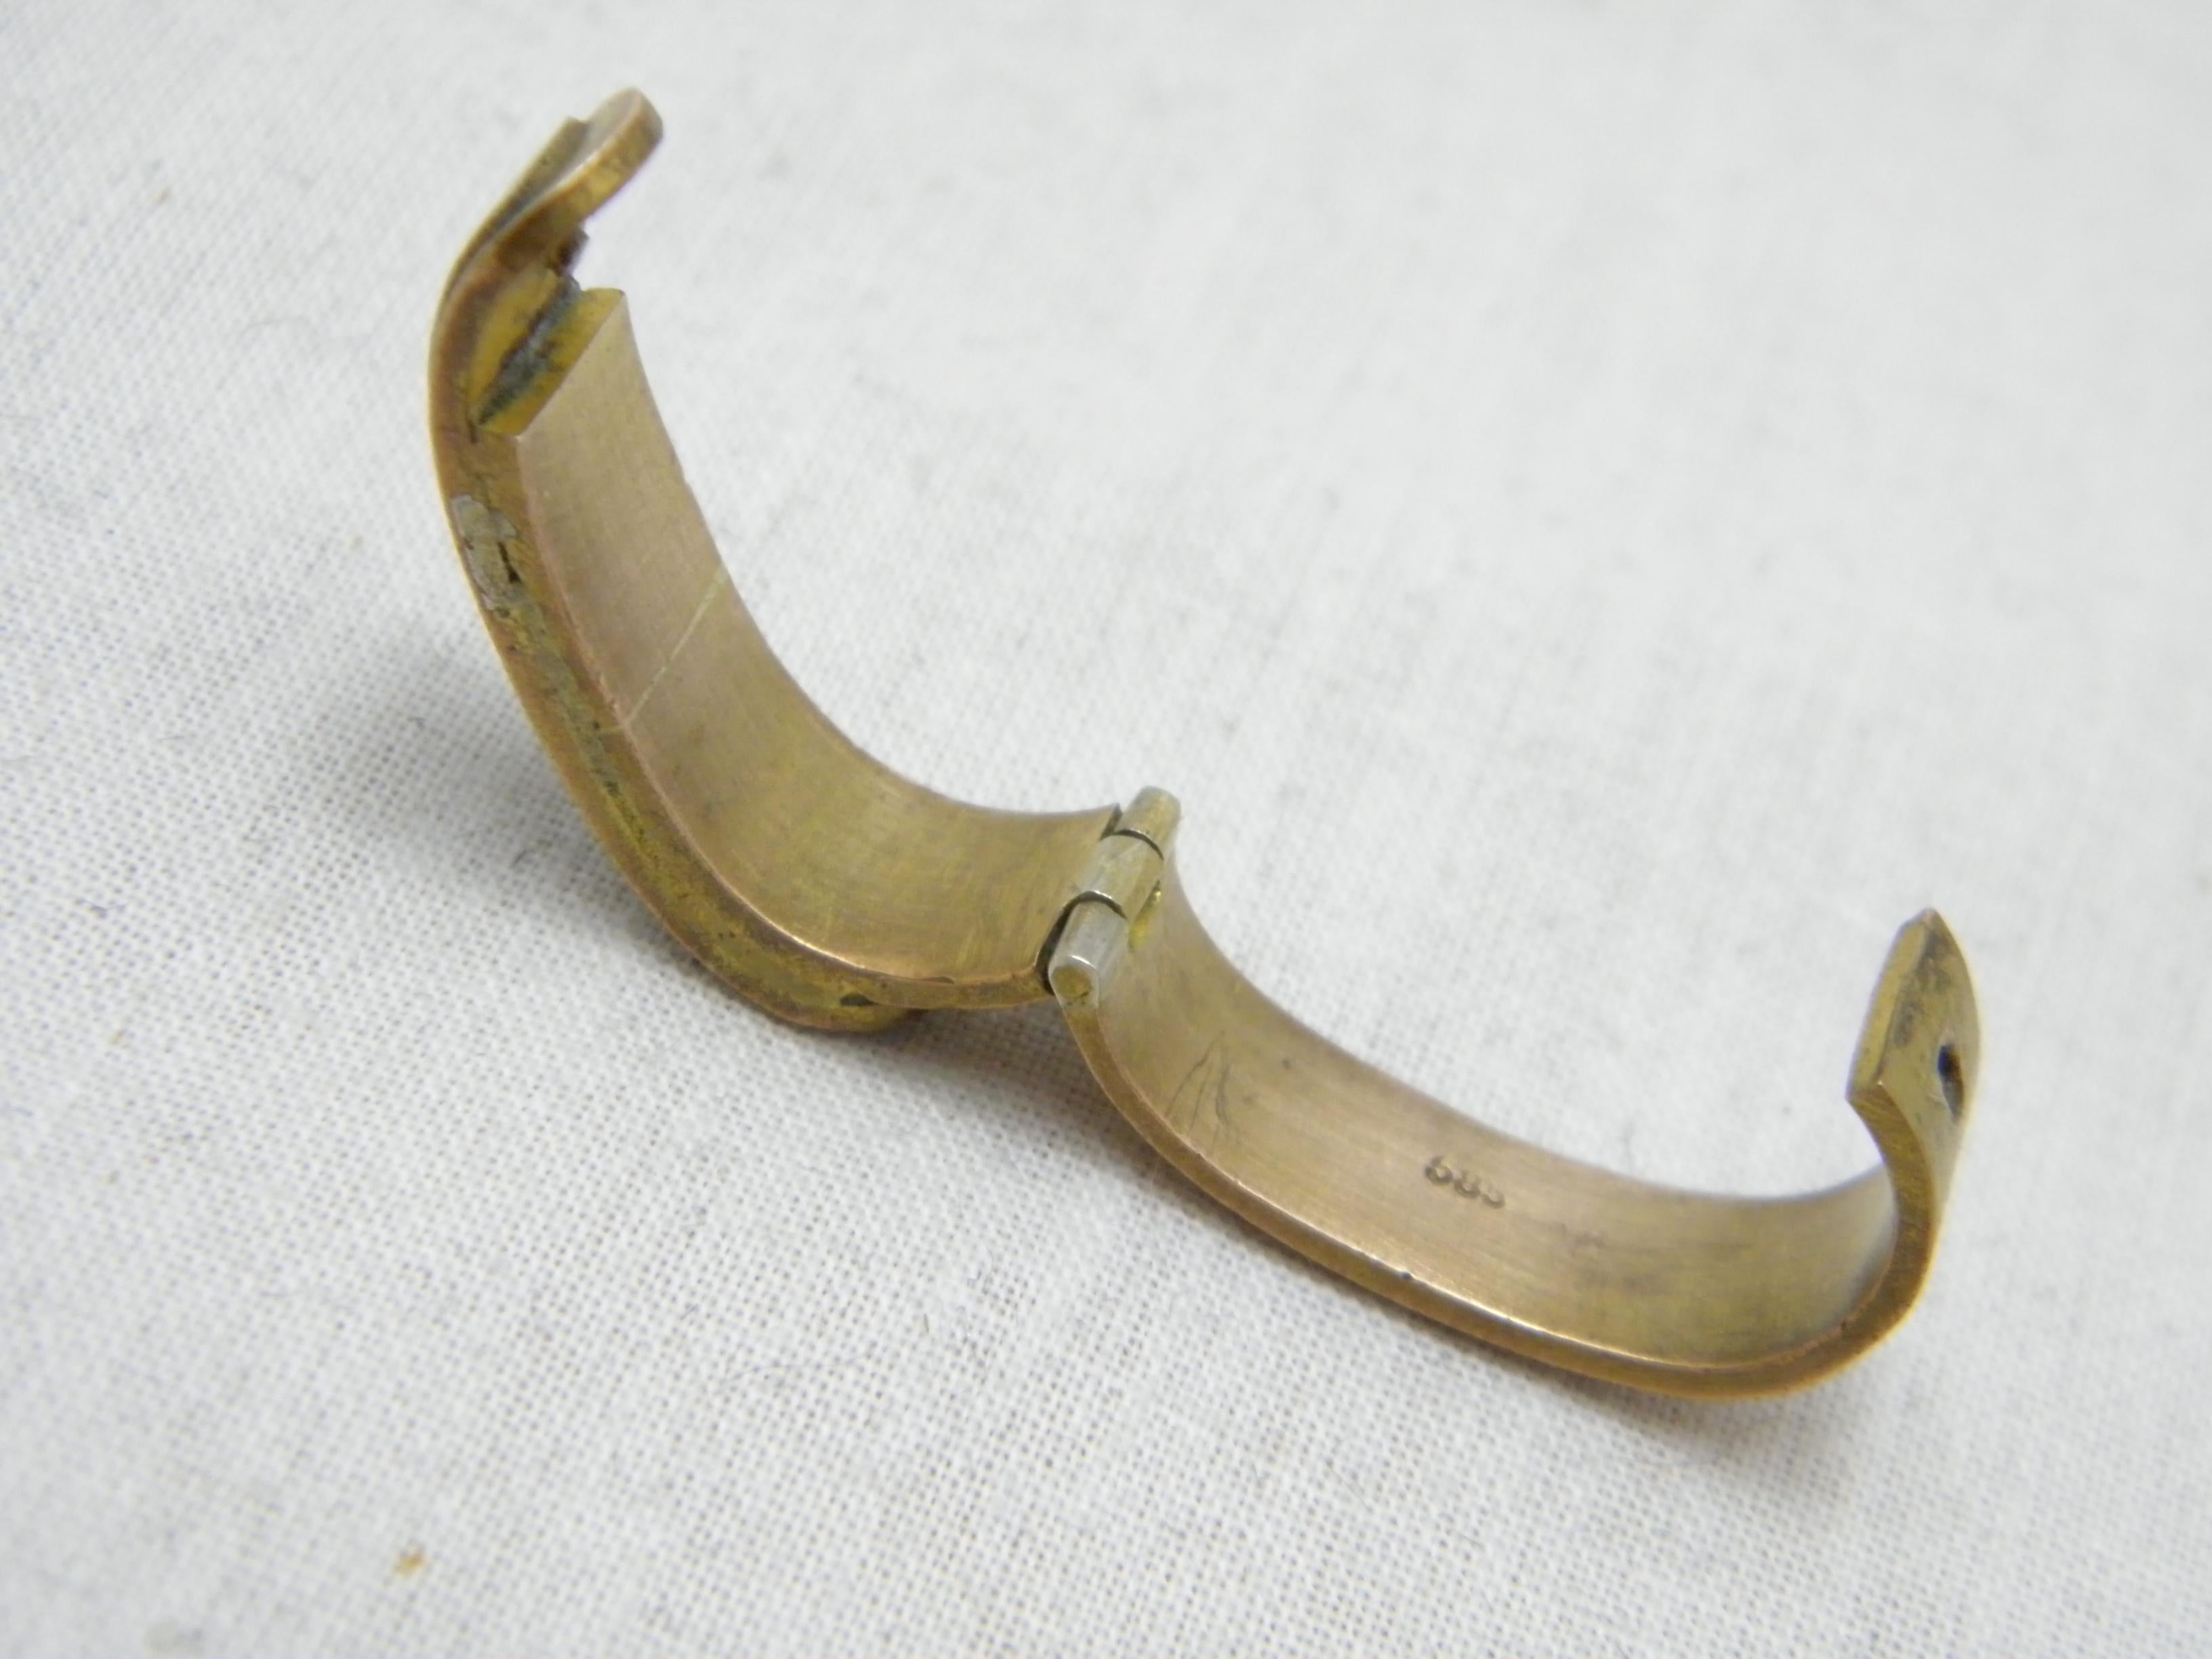 Bargain Vintage 14ct Gold Enamel Scarf Clip Holder c1930s Heavy 585 Purity 8g For Sale 2